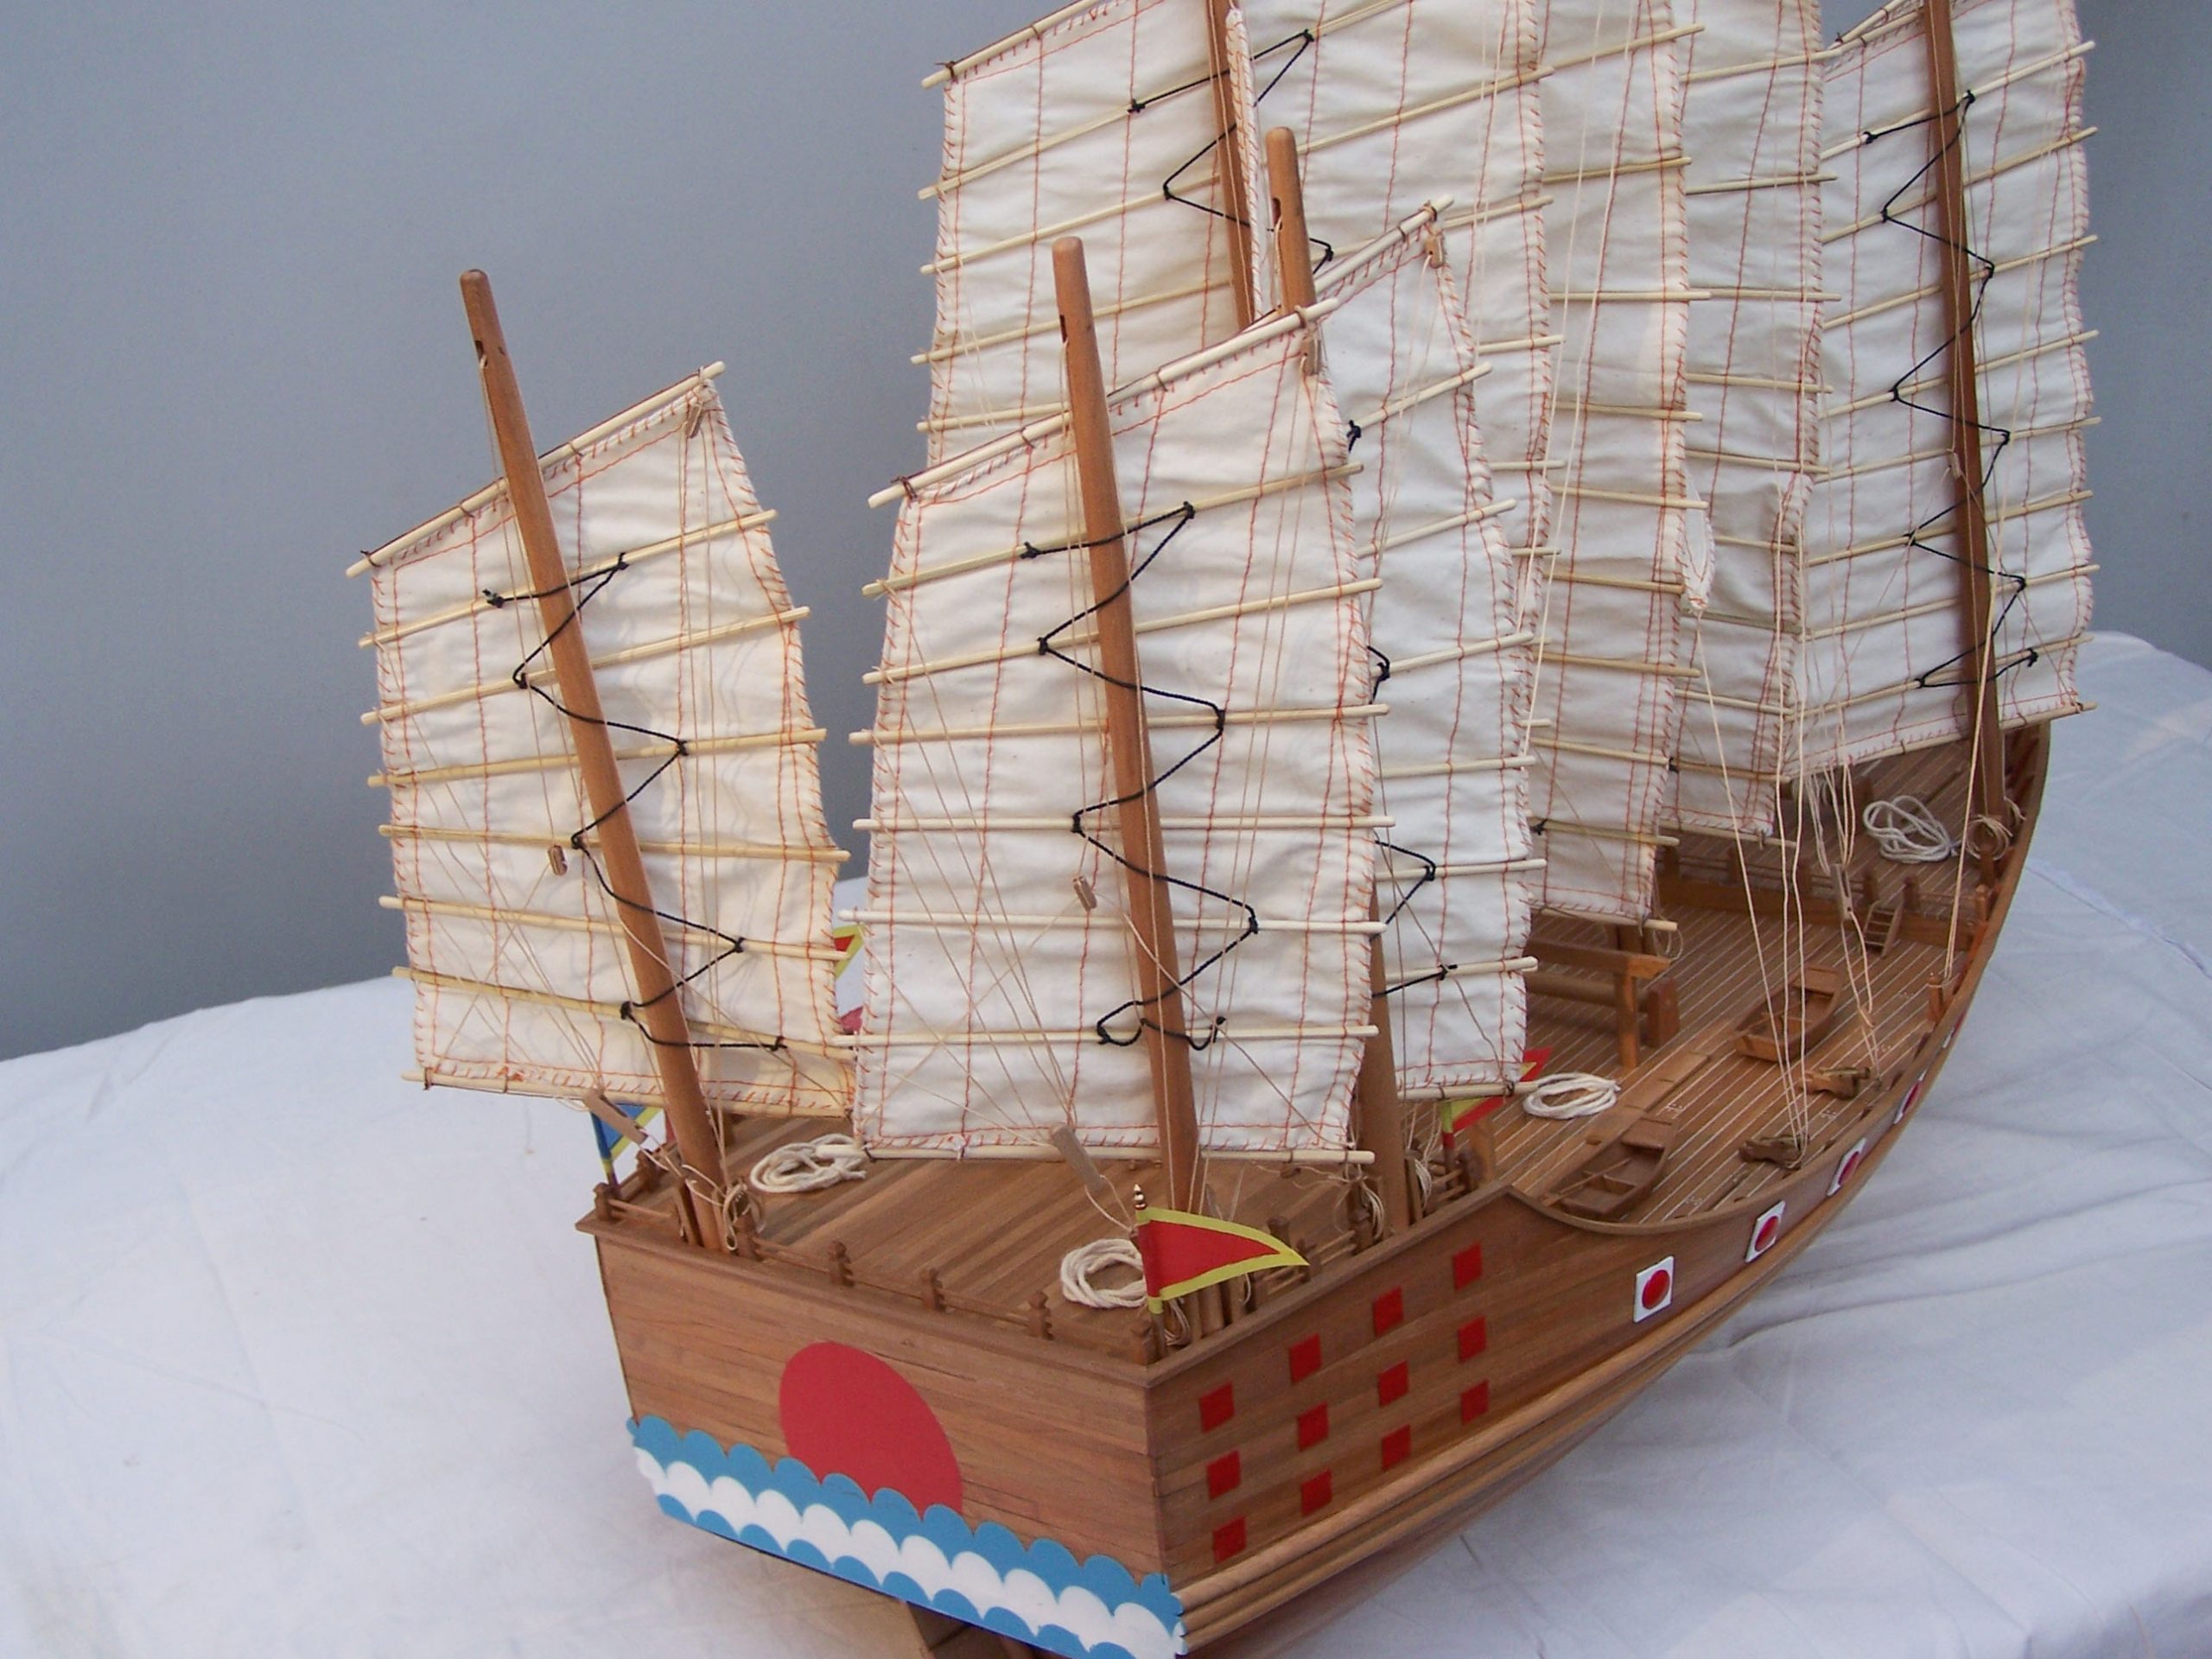 Leave the ship model in your will - Mayflower Modeling